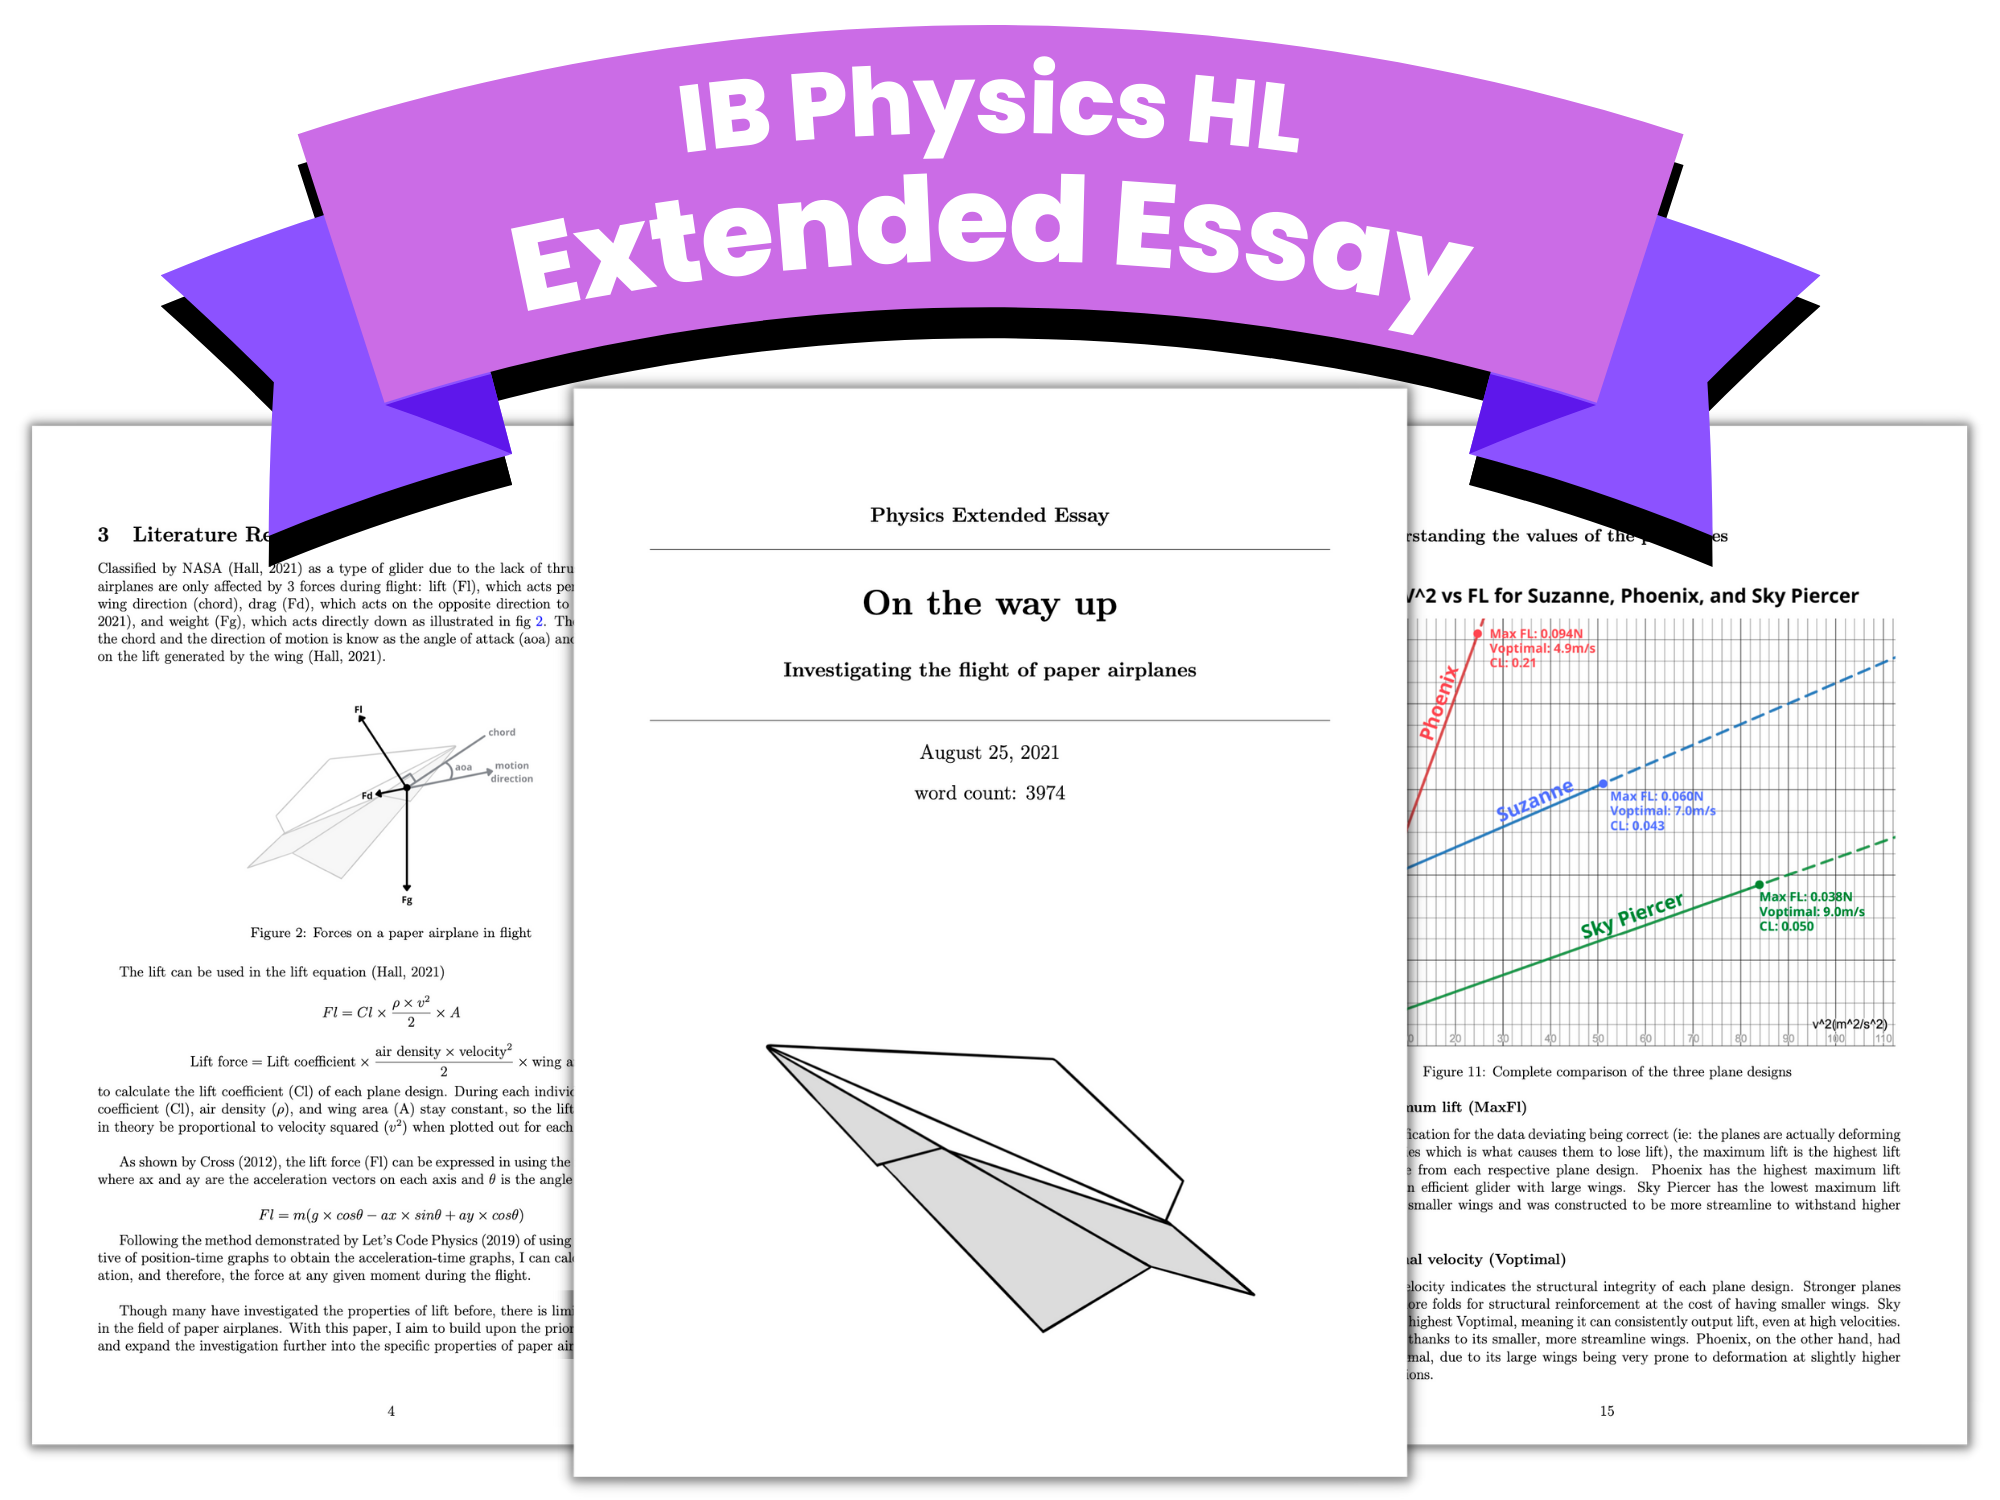 IB Physics HL Extended Essay on Paper Airplanes